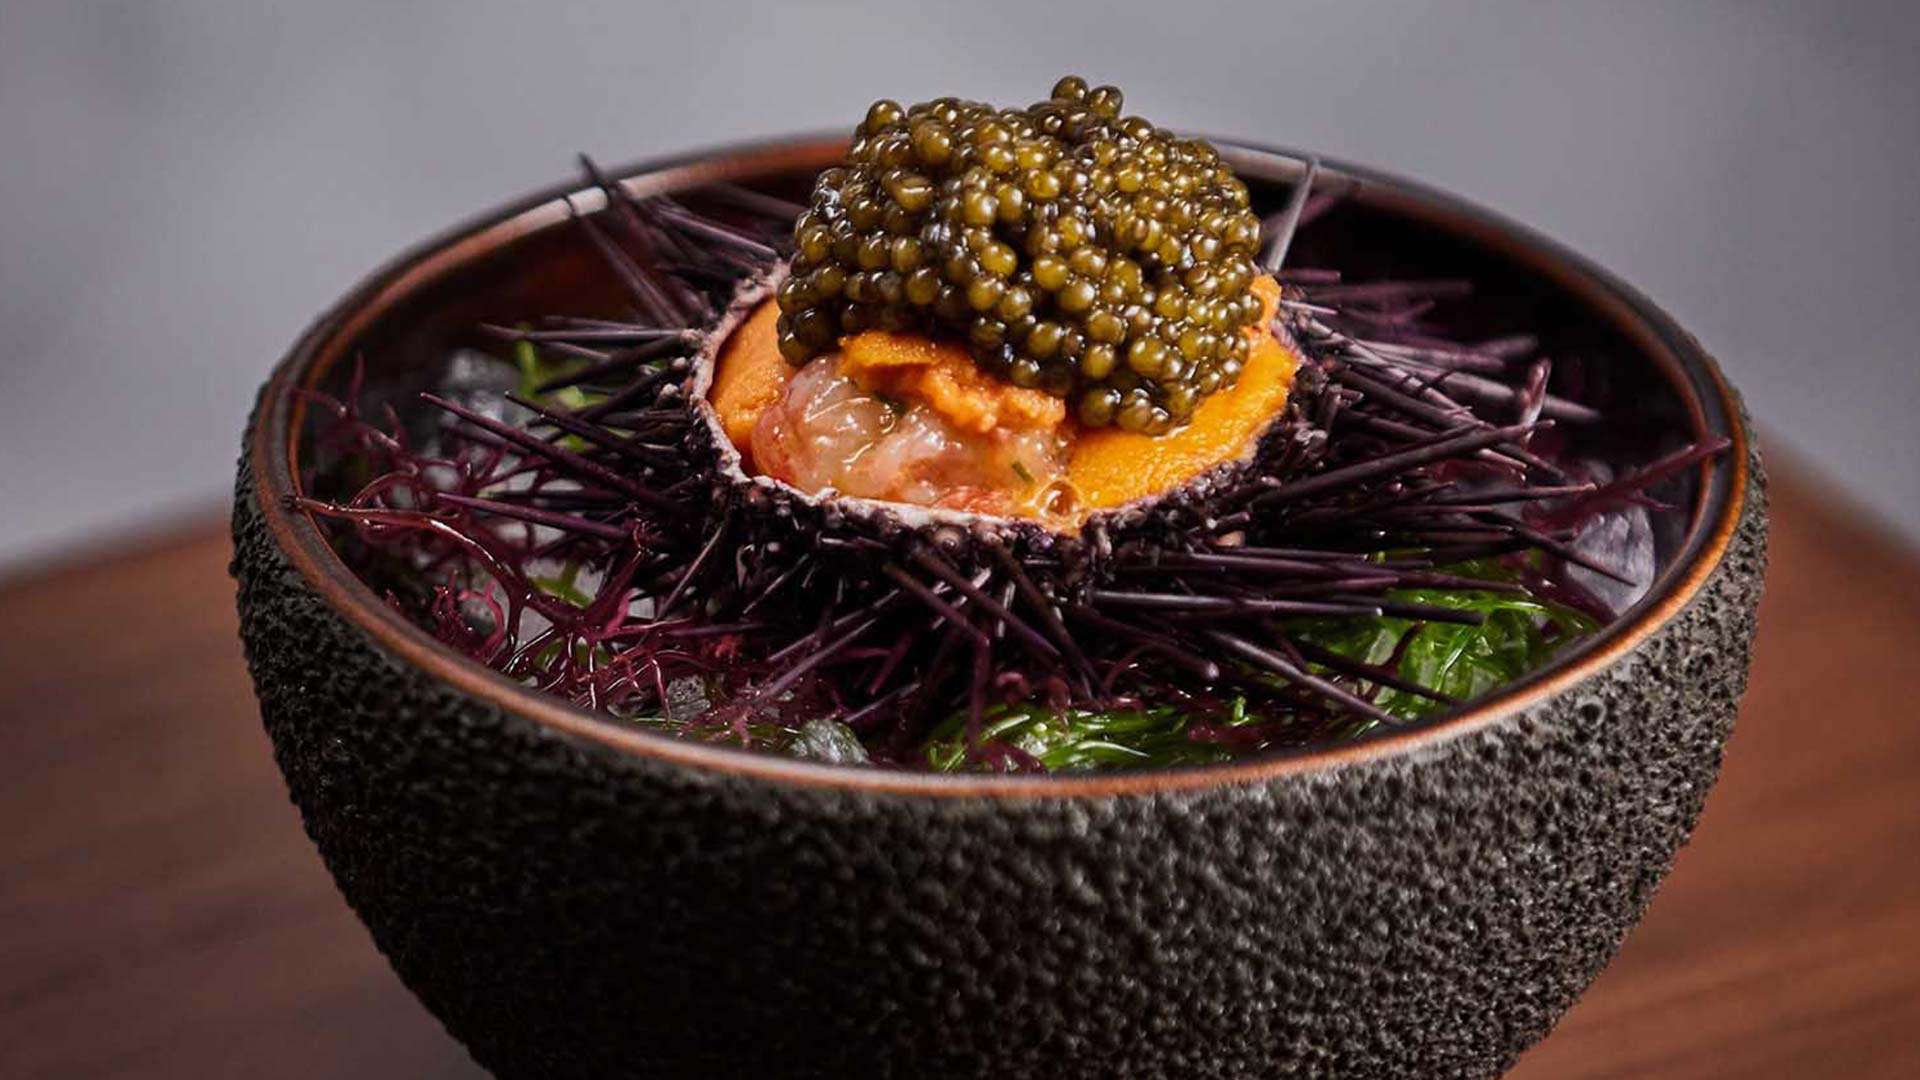 Uni with caviar in a bowl served at Waku Ghin, a Japanese restaurant in Singapore